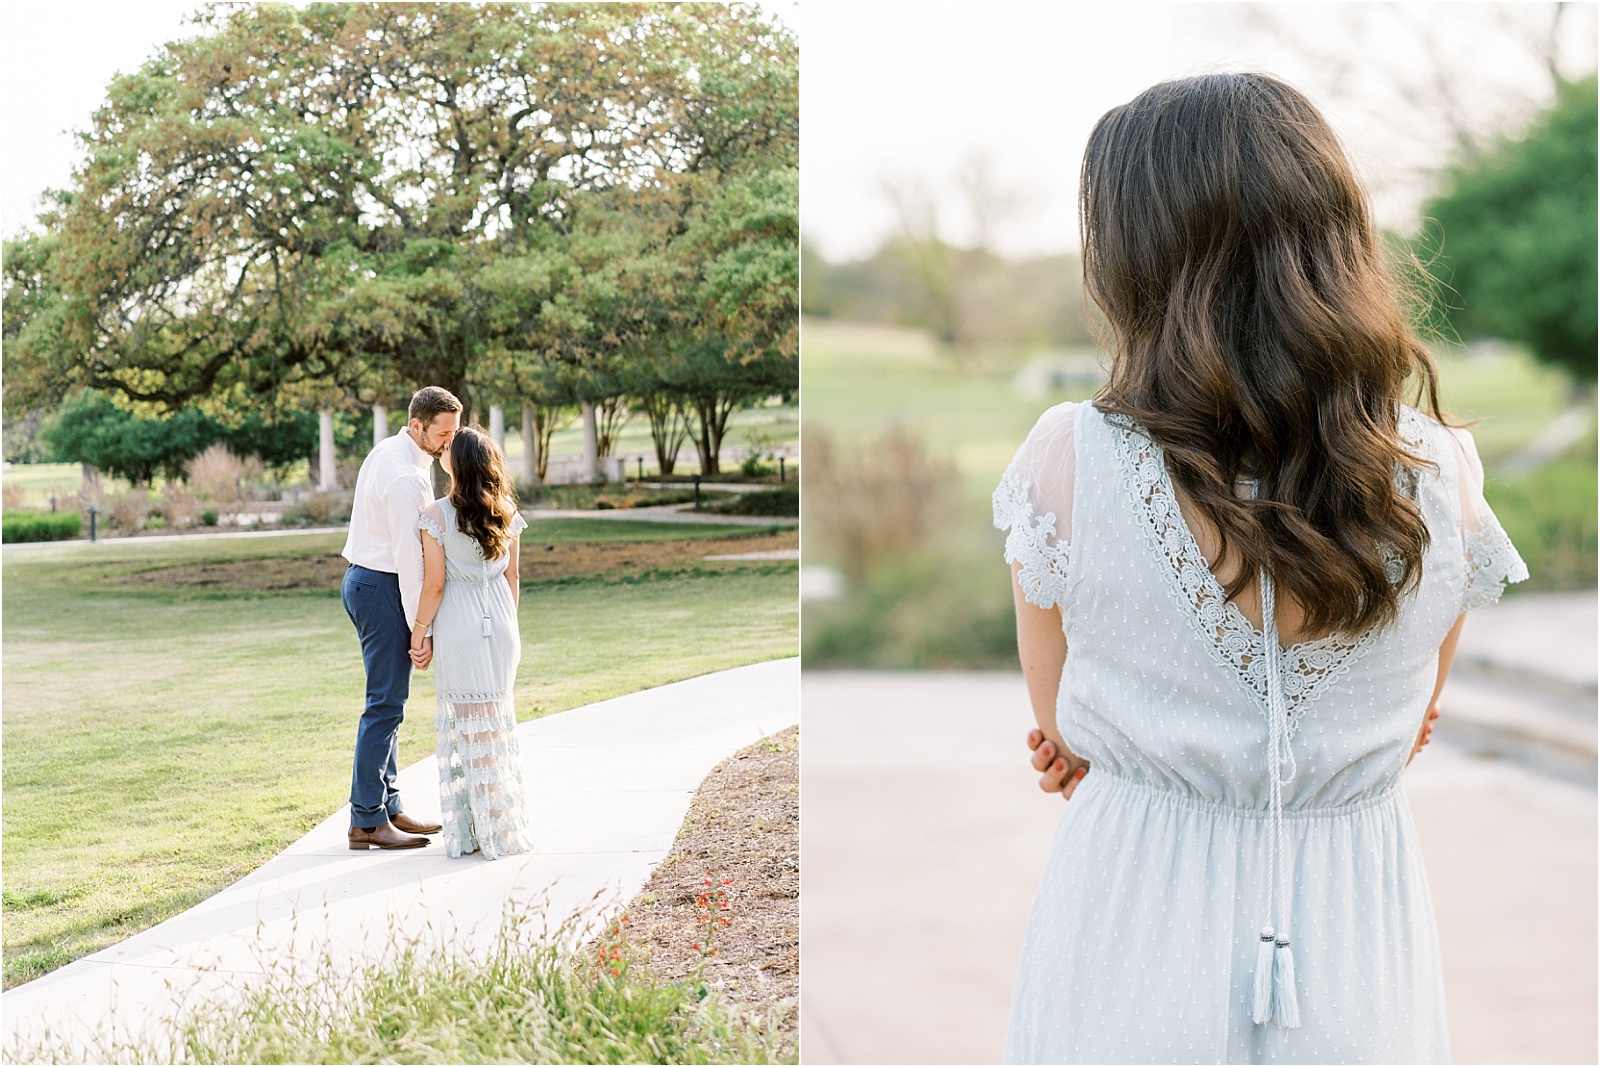 Spring Engagement Session in Goergetown